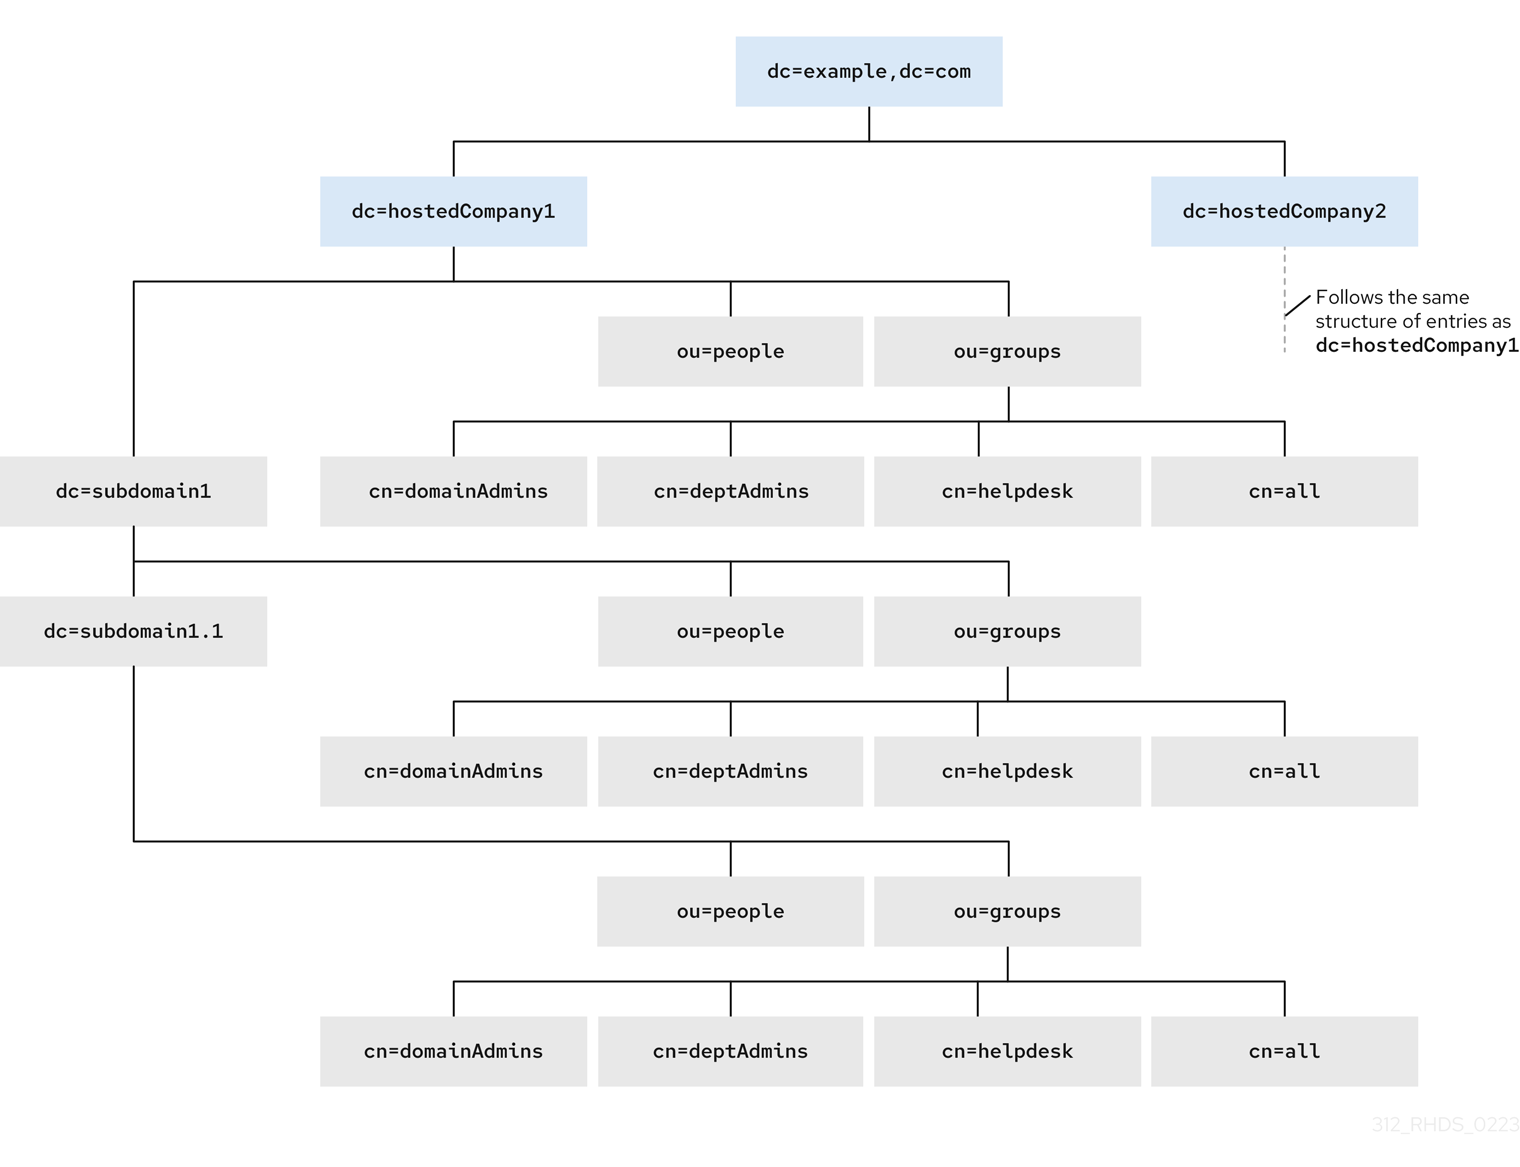 An example of a directory tree for macro ACI.